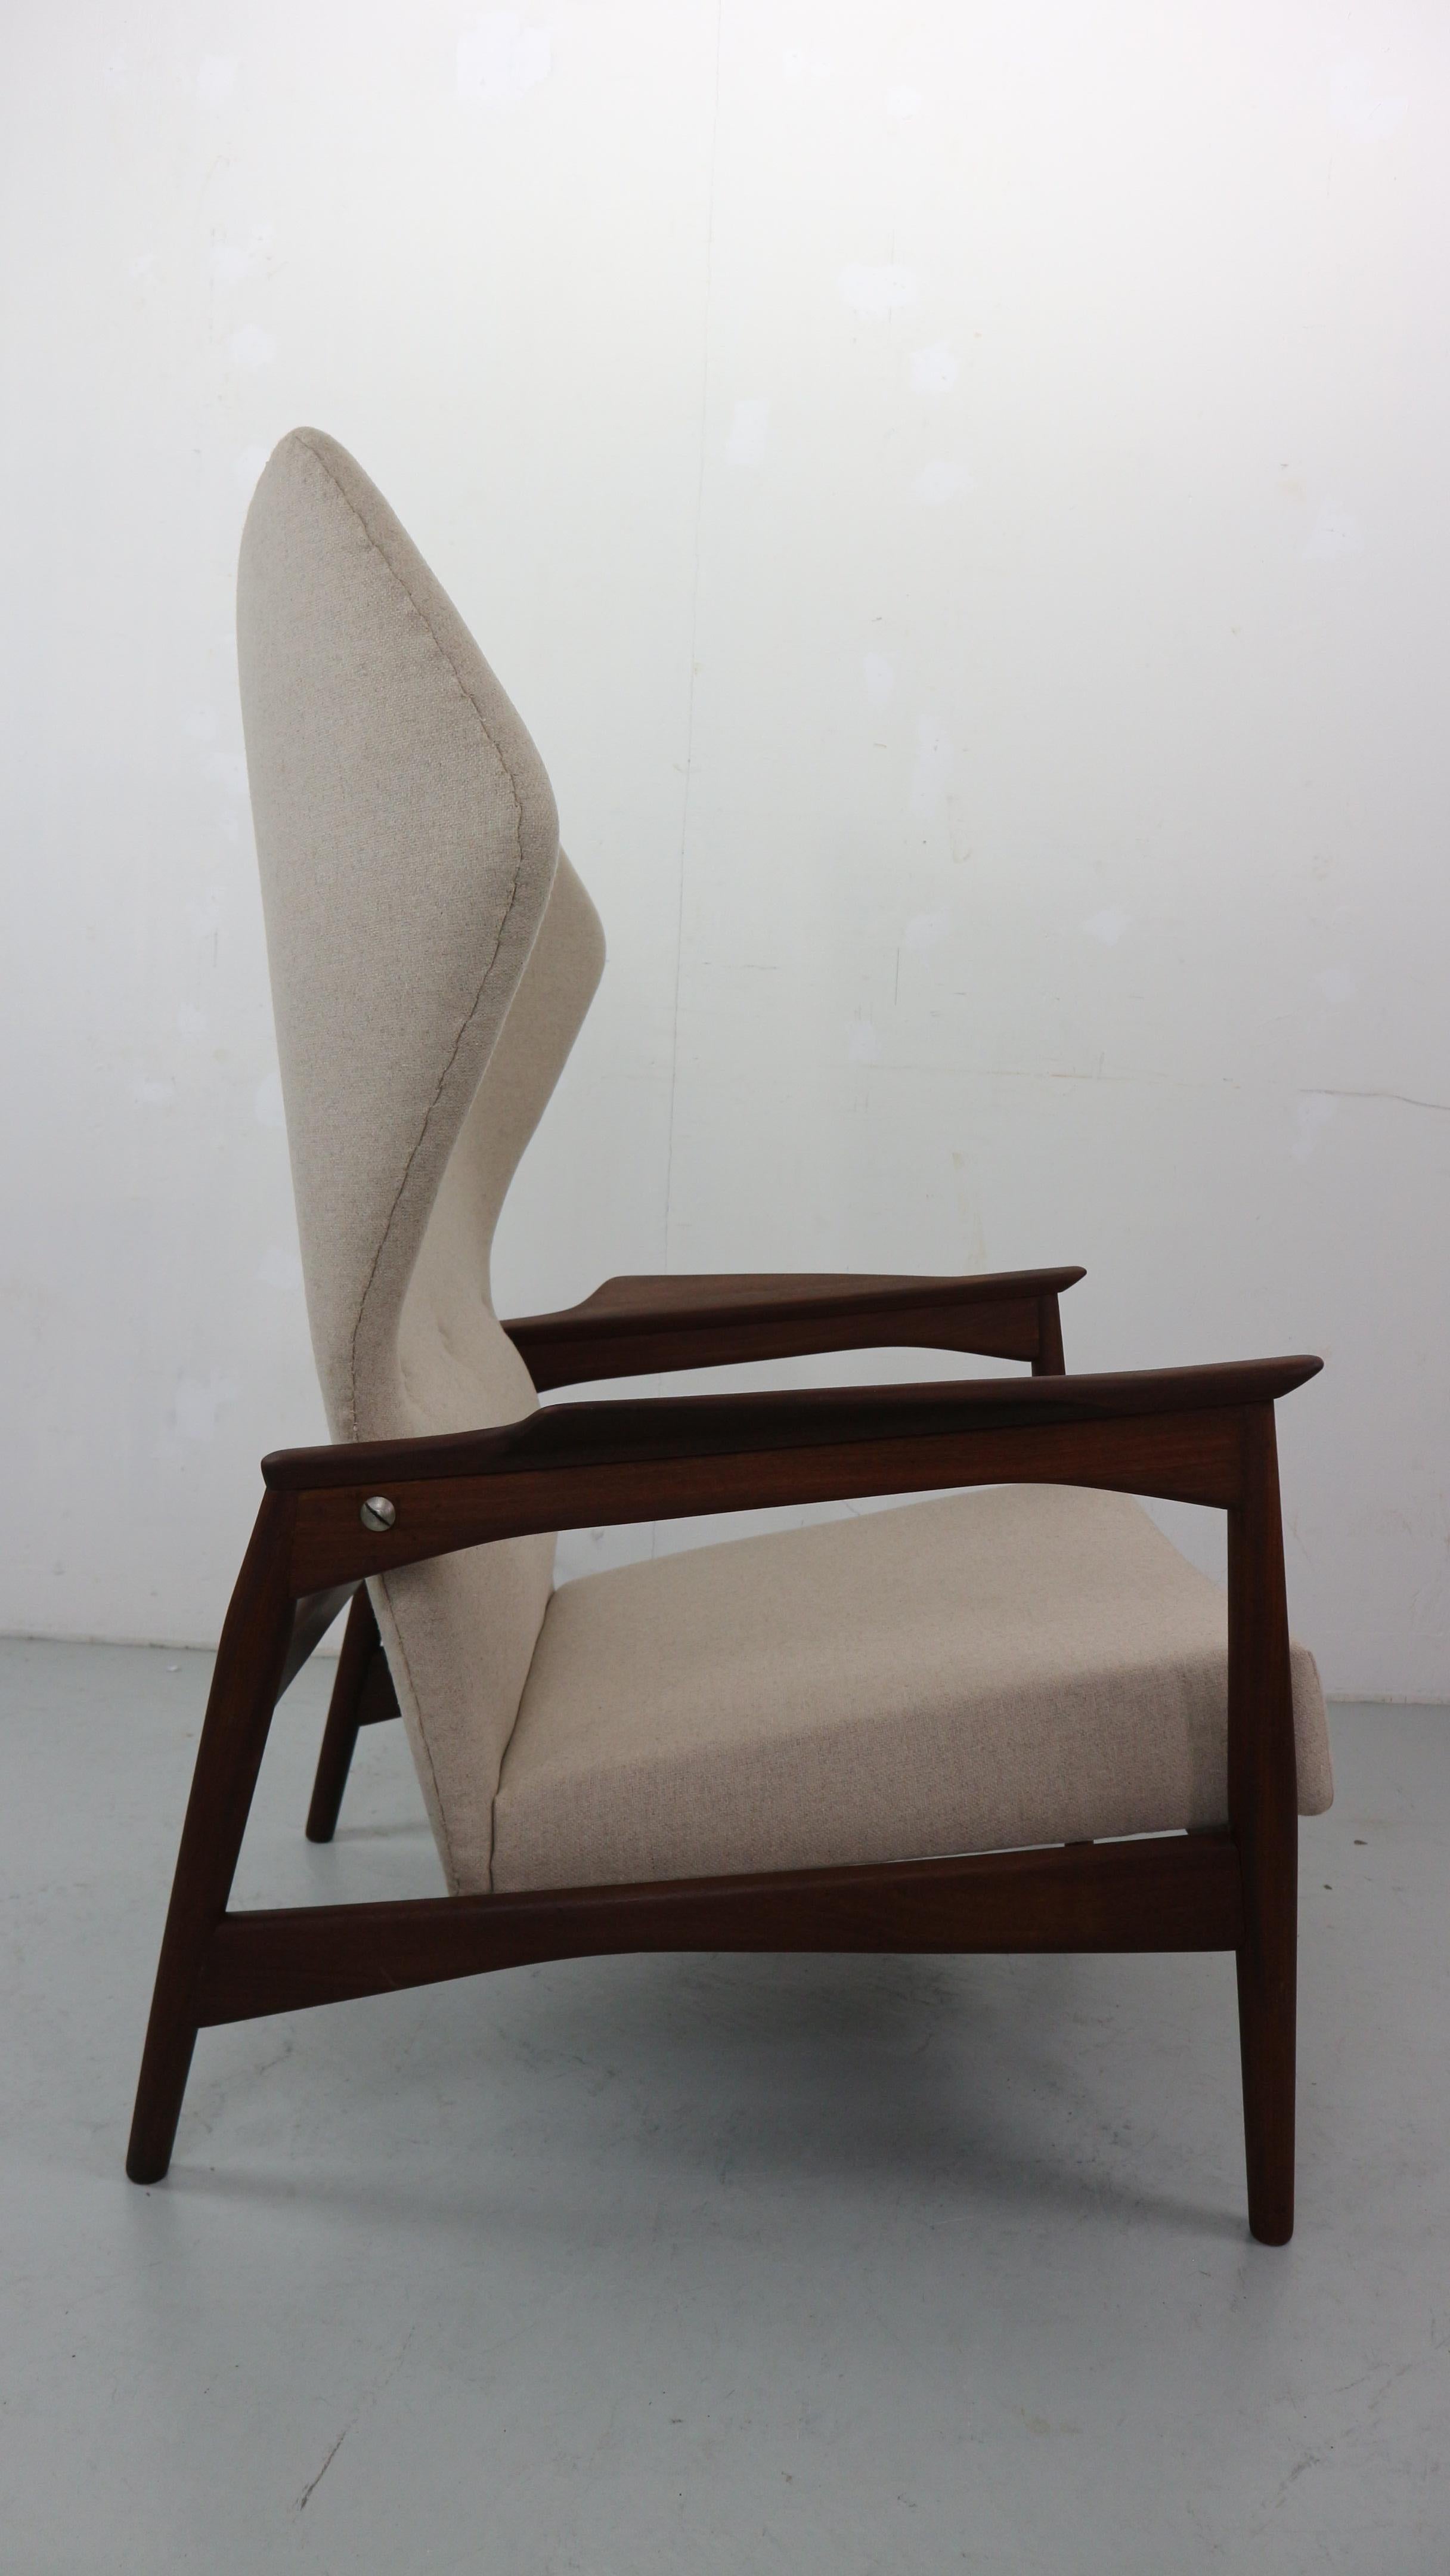 Danish Adjustable Wingback Lounge Chair in Teak, by Ib KOFOD LARSEN In Good Condition For Sale In The Hague, NL